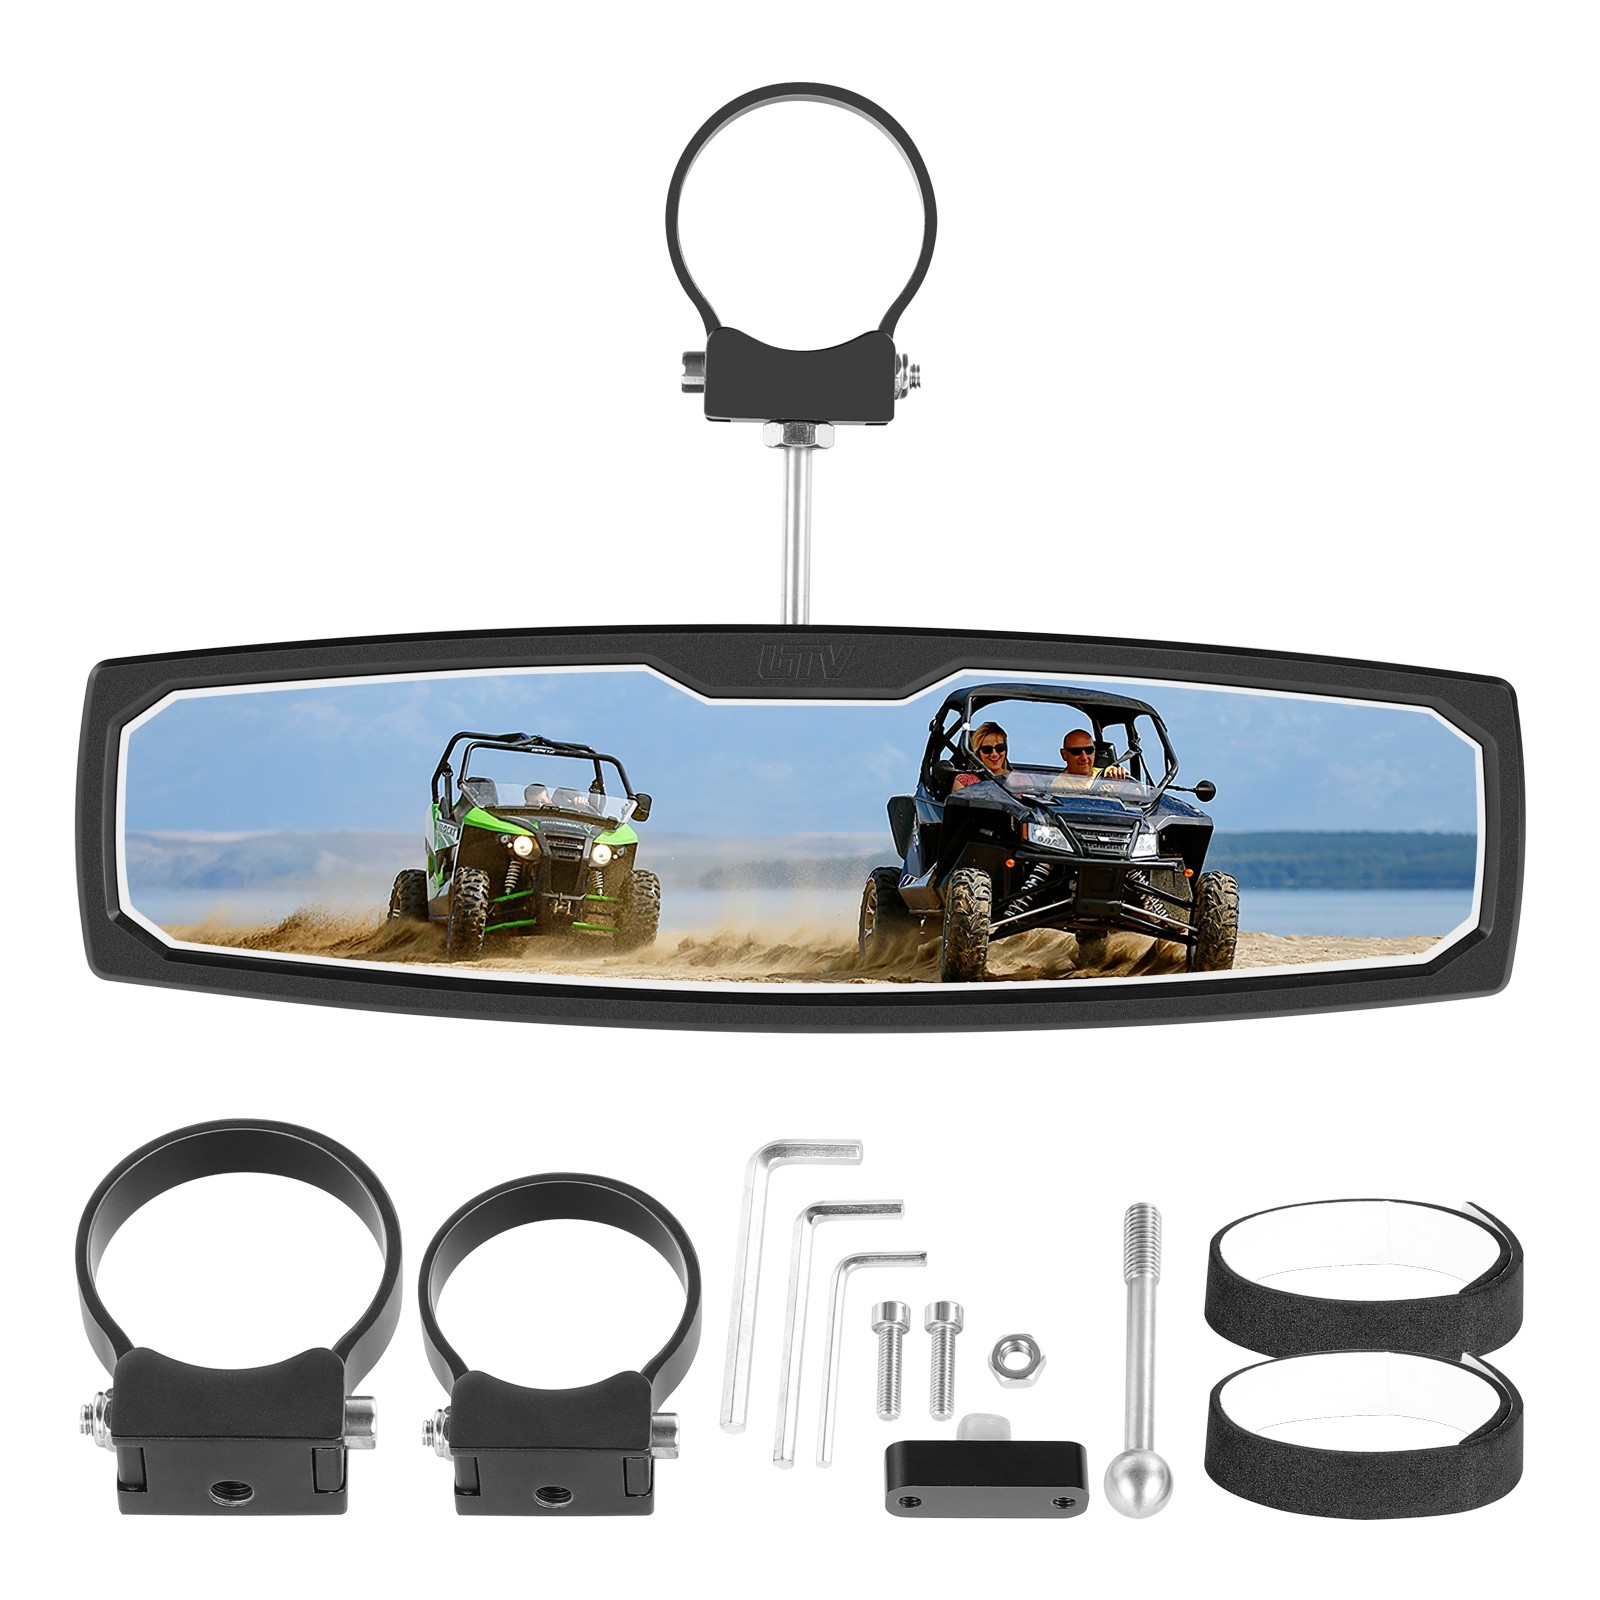 RZR Rear View Mirror kemimoto 15 UTV Center Mirror with 1.75 Aluminum Clamps Compatible with RZR 800 900 1000 Turbo Arctic Cat Wildcat 